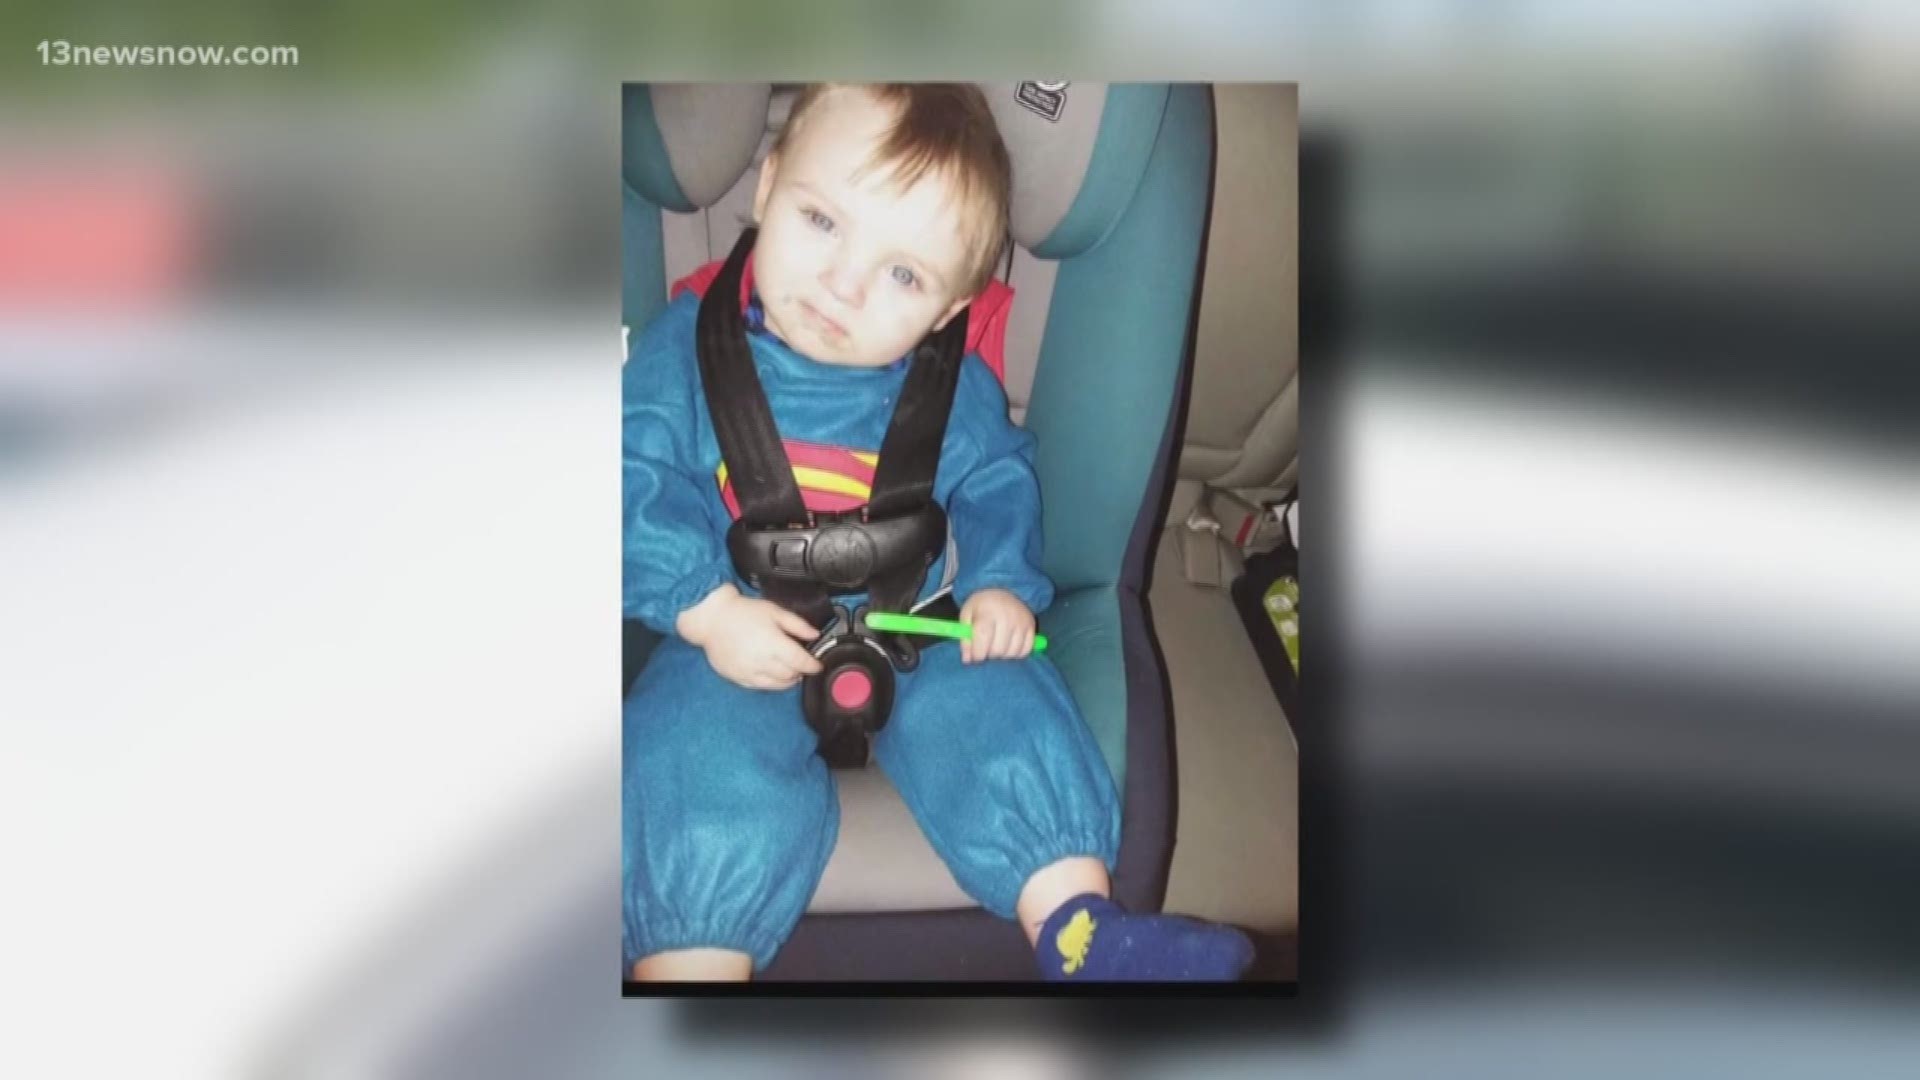 Search dogs, drones and more resources are being used to try and locate missing two-year-old Noah Tomlin.